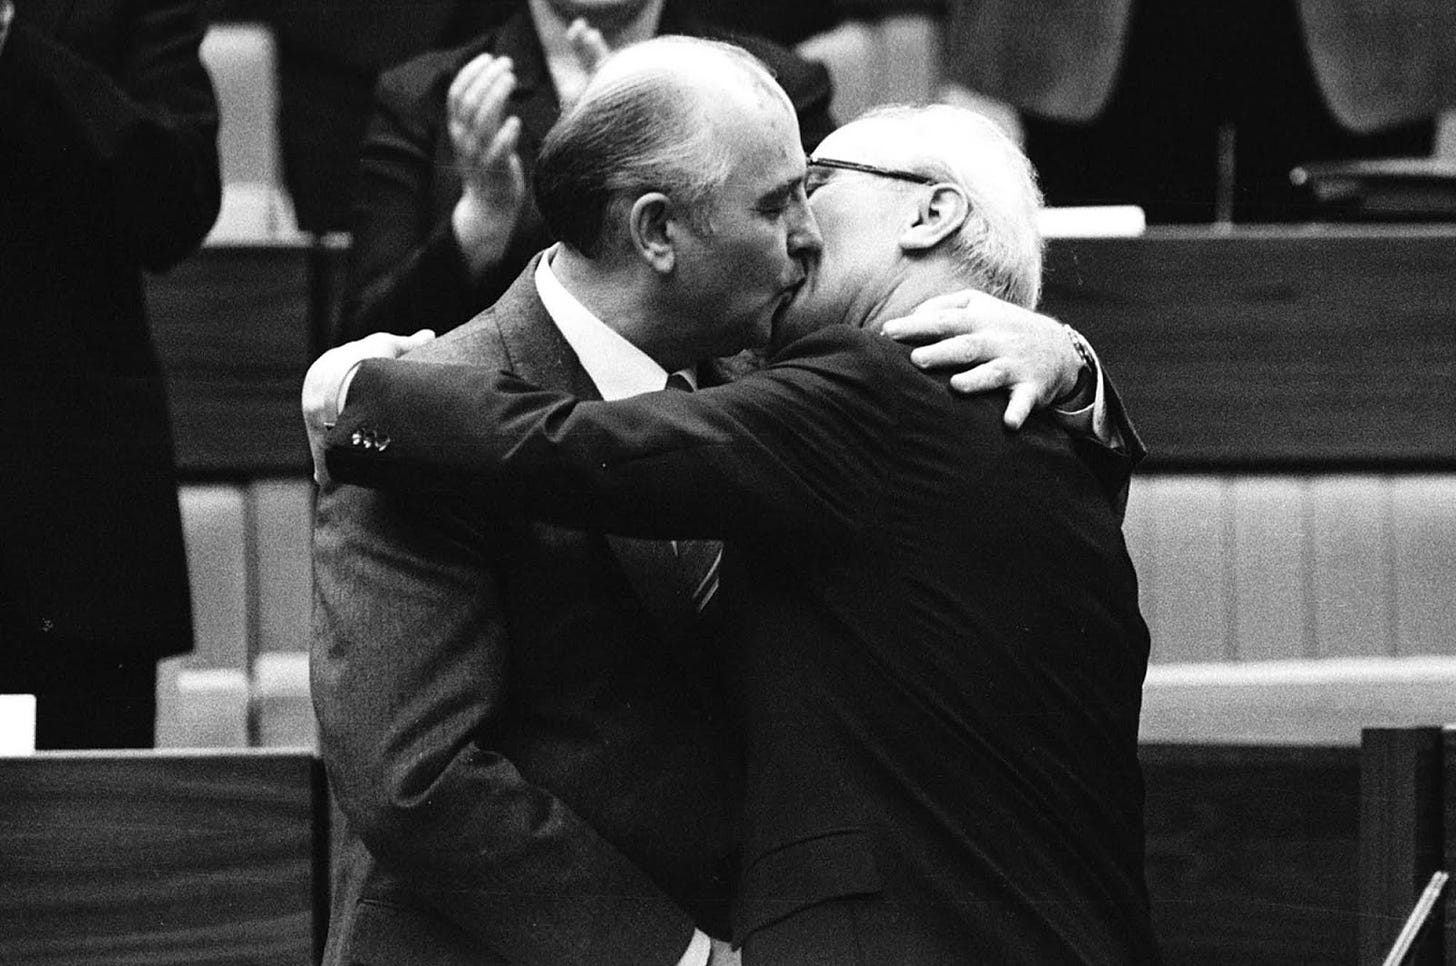 The Soviet leader Mikhail Gorbachev congratulates East German leader Erich Honecker with a fraternal hug and kiss after Honecker's re-election as the head of the Communist Party Congress in East Berlin, on April 21, 1986. 